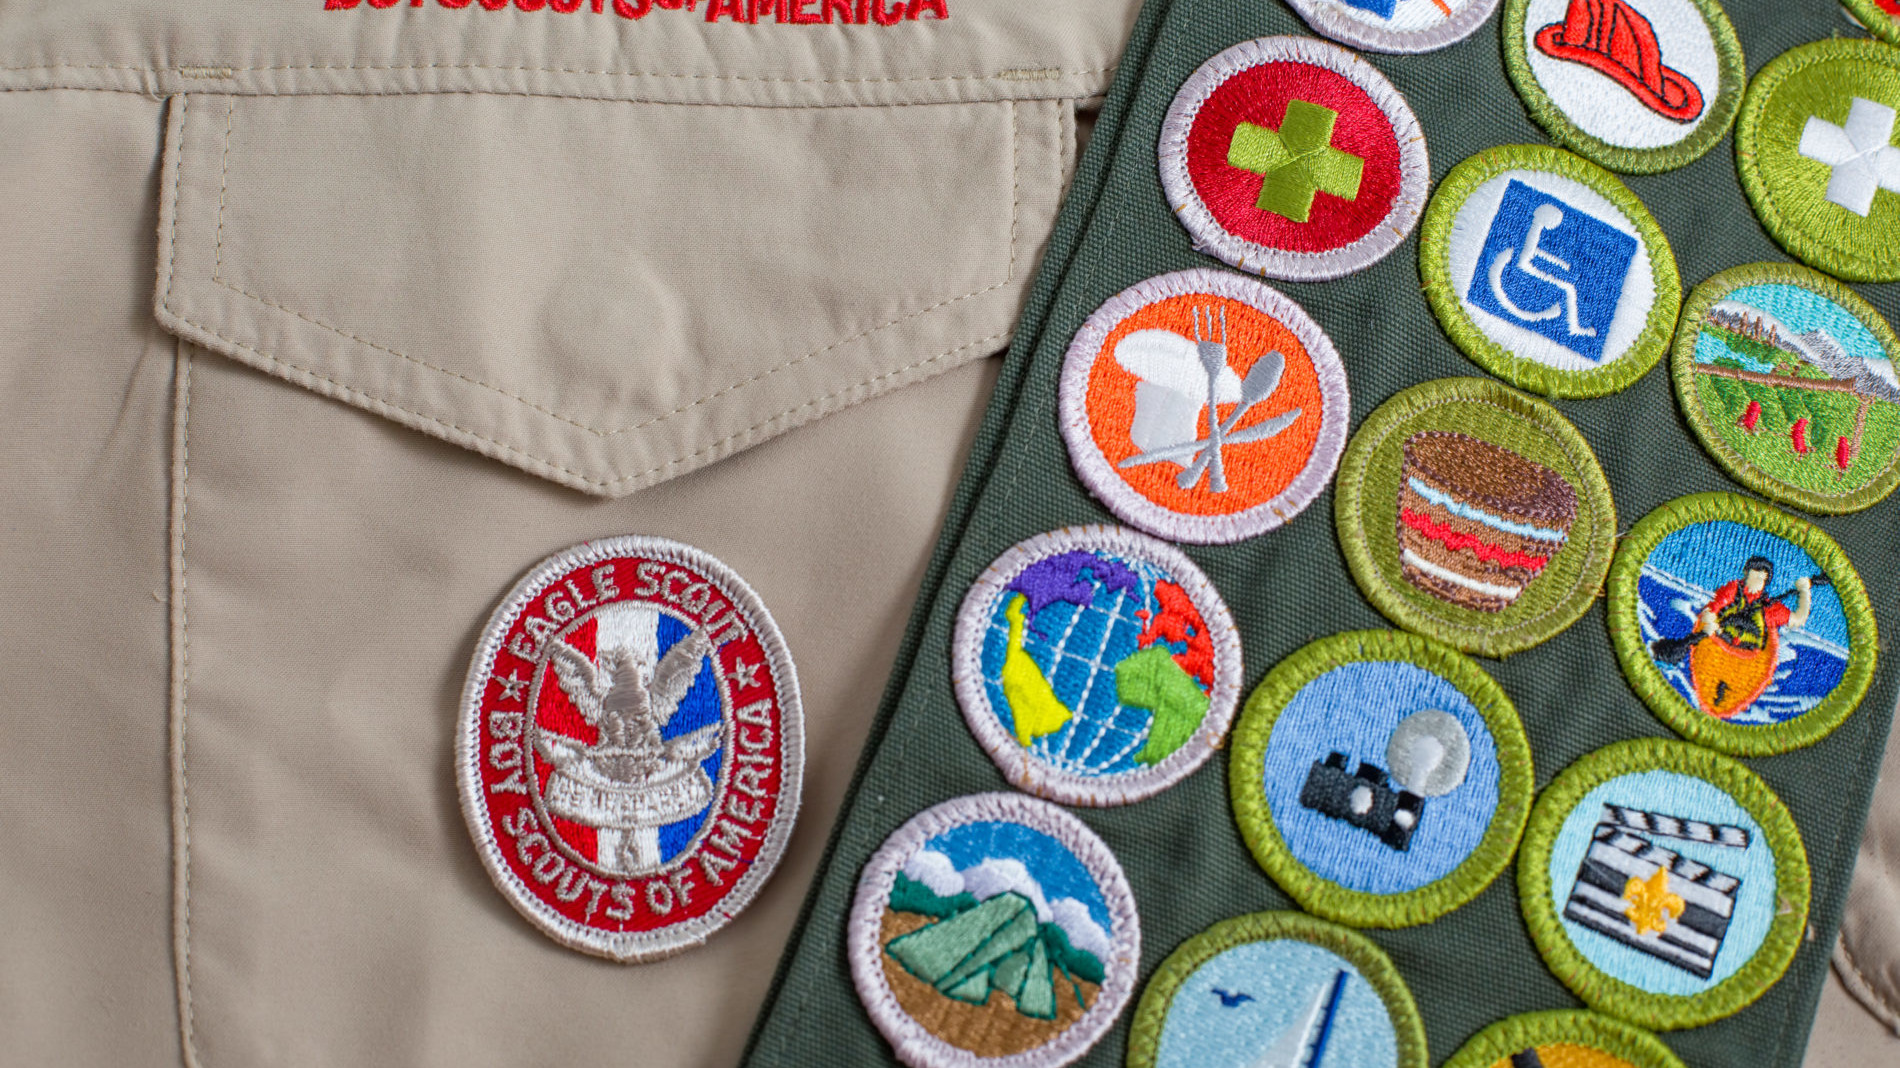 Boy scout jacket with many merit badges, including a Kayaking badge for beginner whitewater kayaking